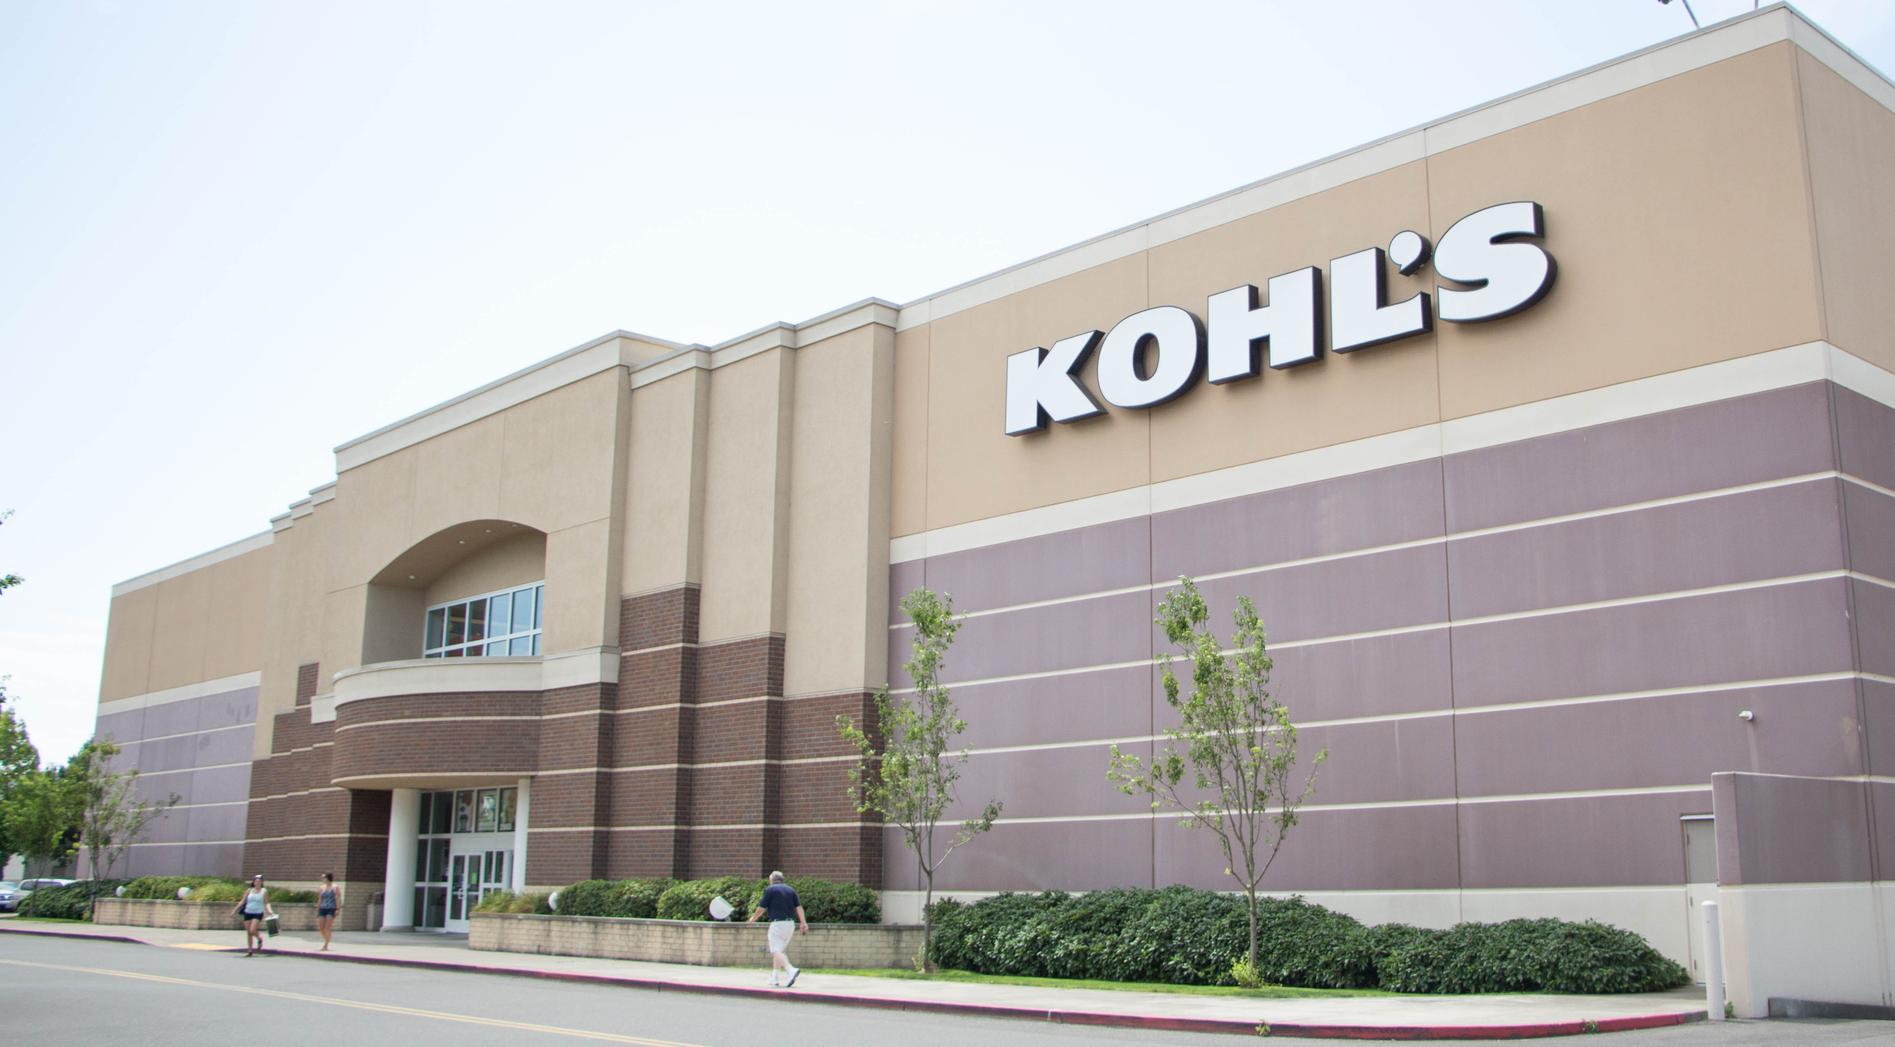 During a March 1 earnings call, Kohl’s CEO Kevin Mansell briefly mentioned the company would provide space to discount grocer Aldi at five to 10 locations across the U.S..